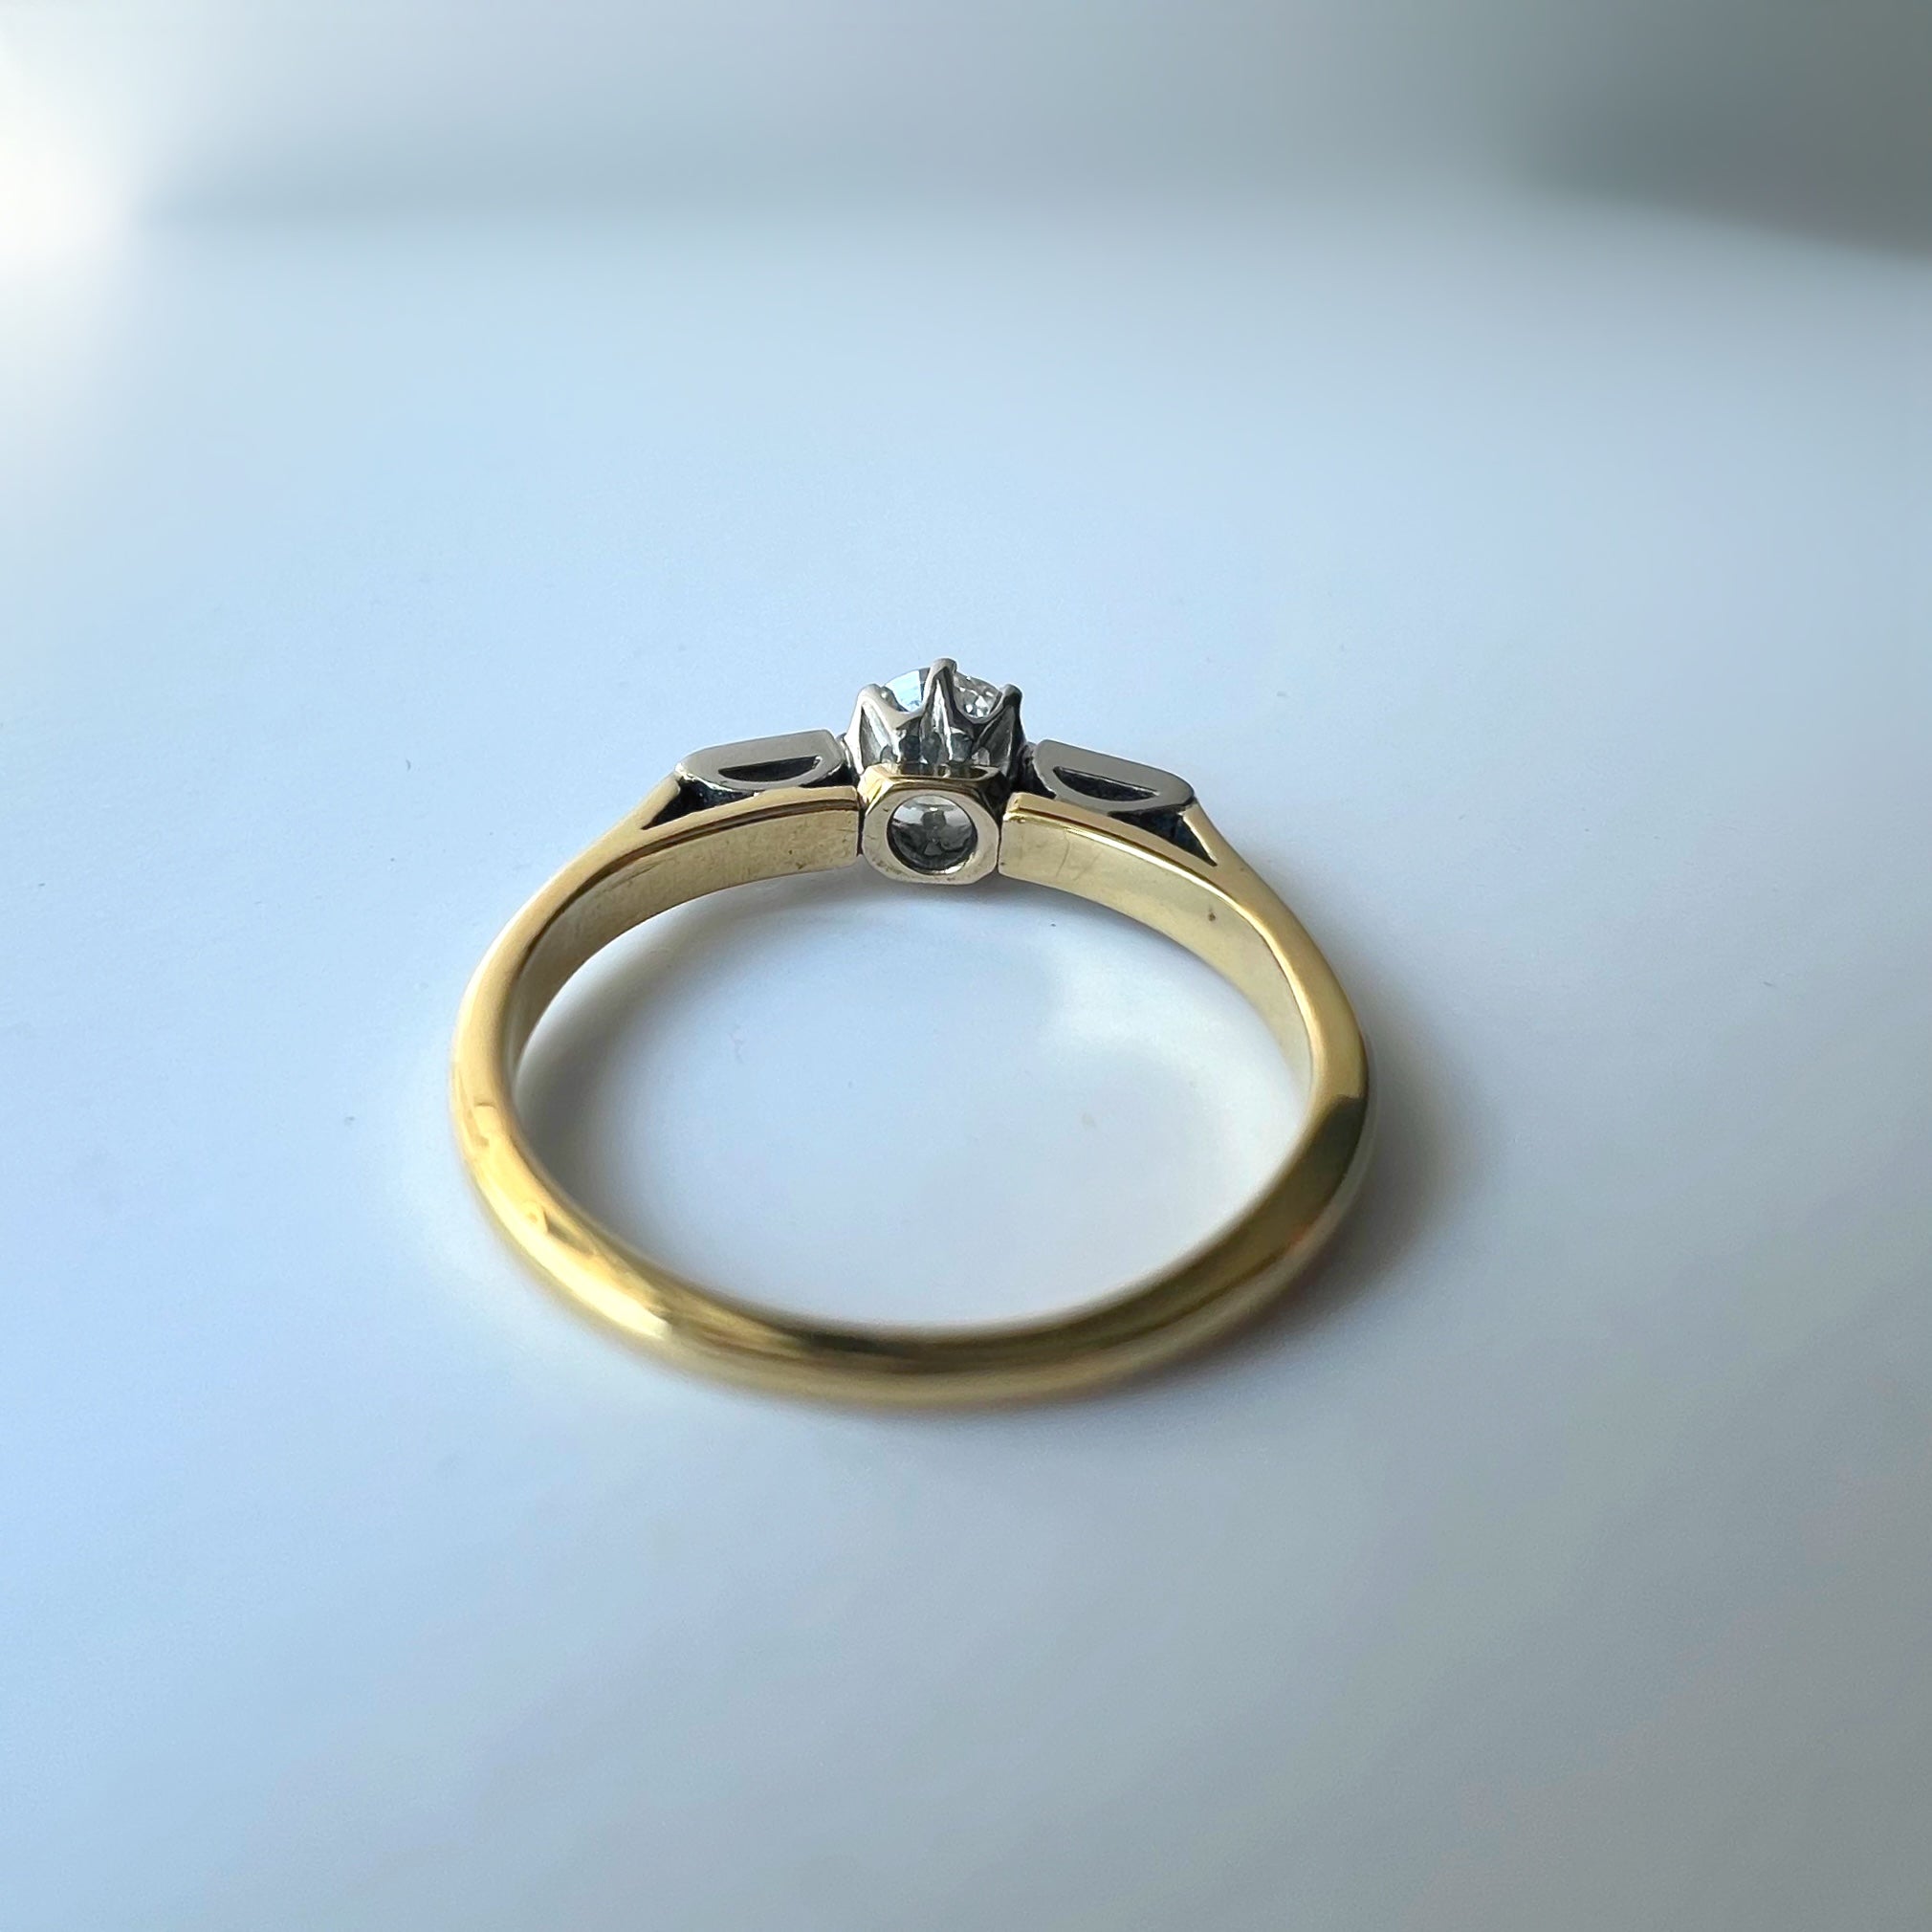 Vintage 0.25ct Diamond Solitaire Ring